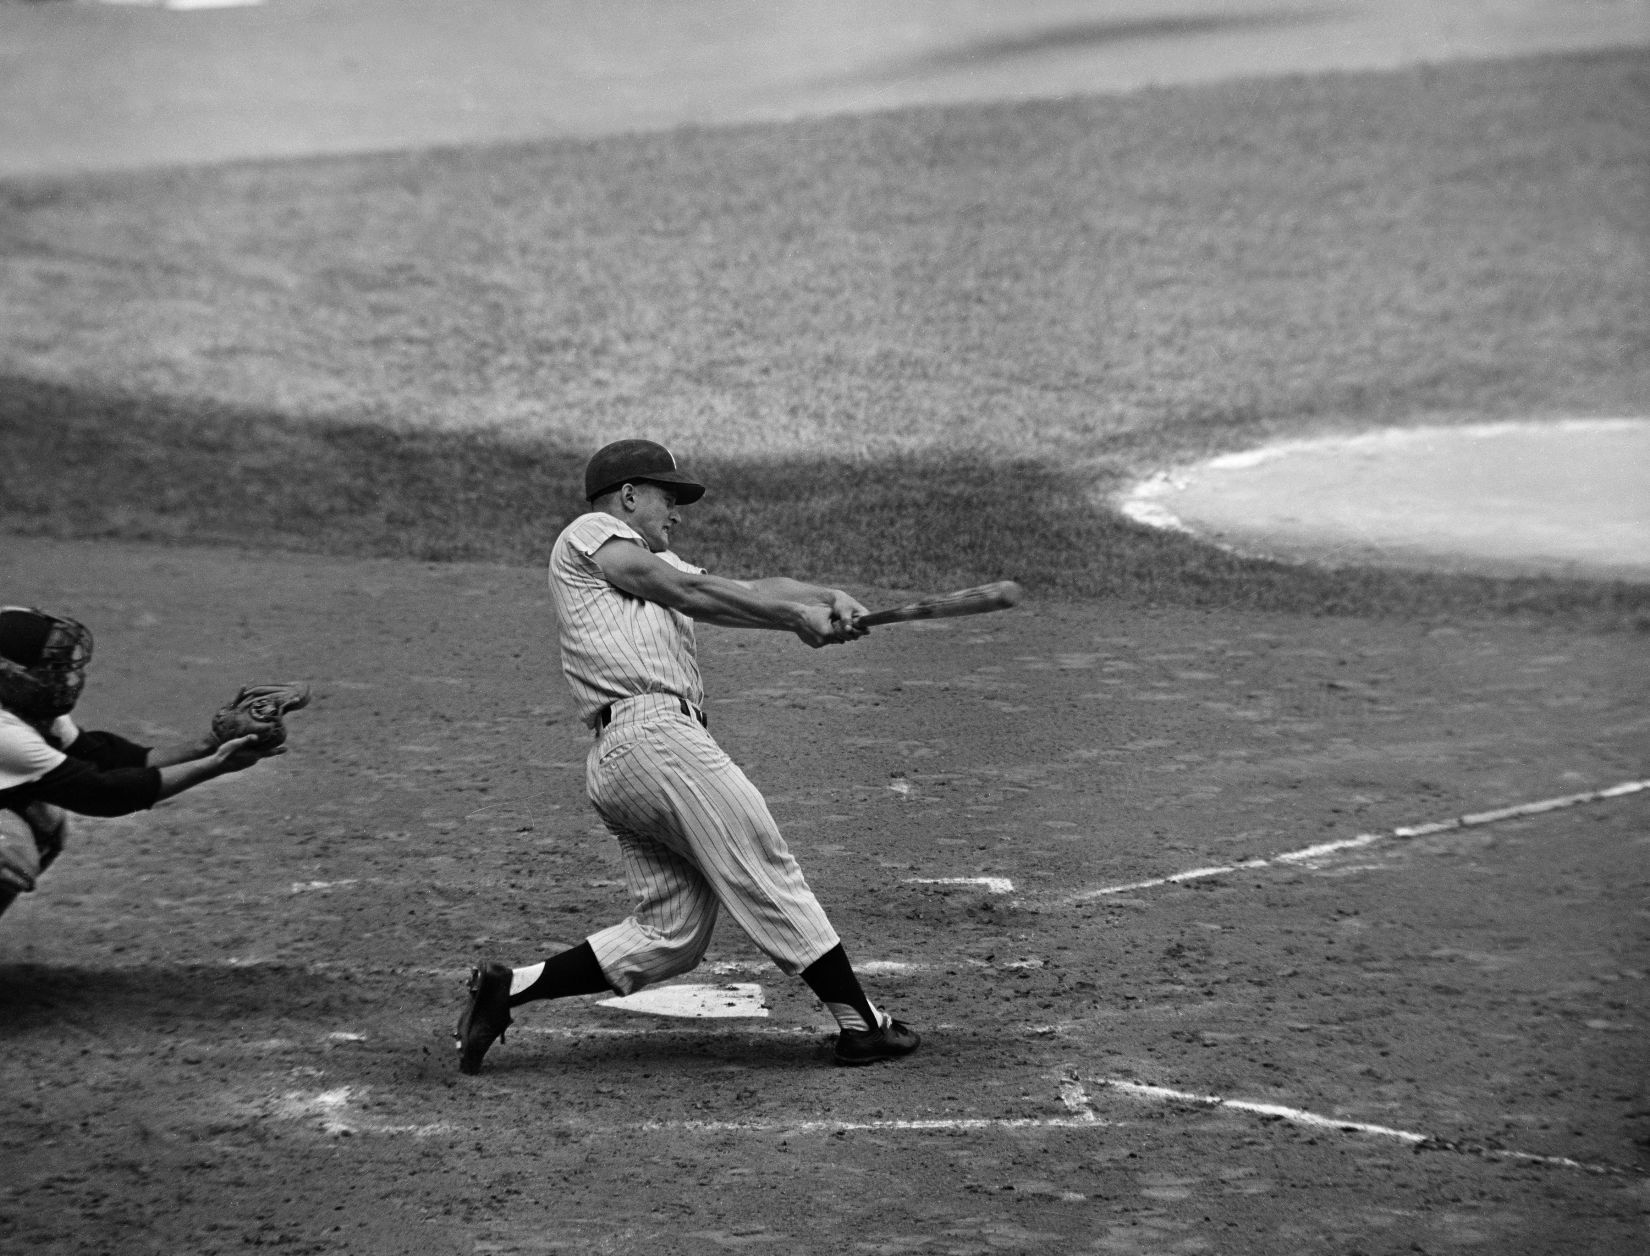 Roger Maris left behind complicated 